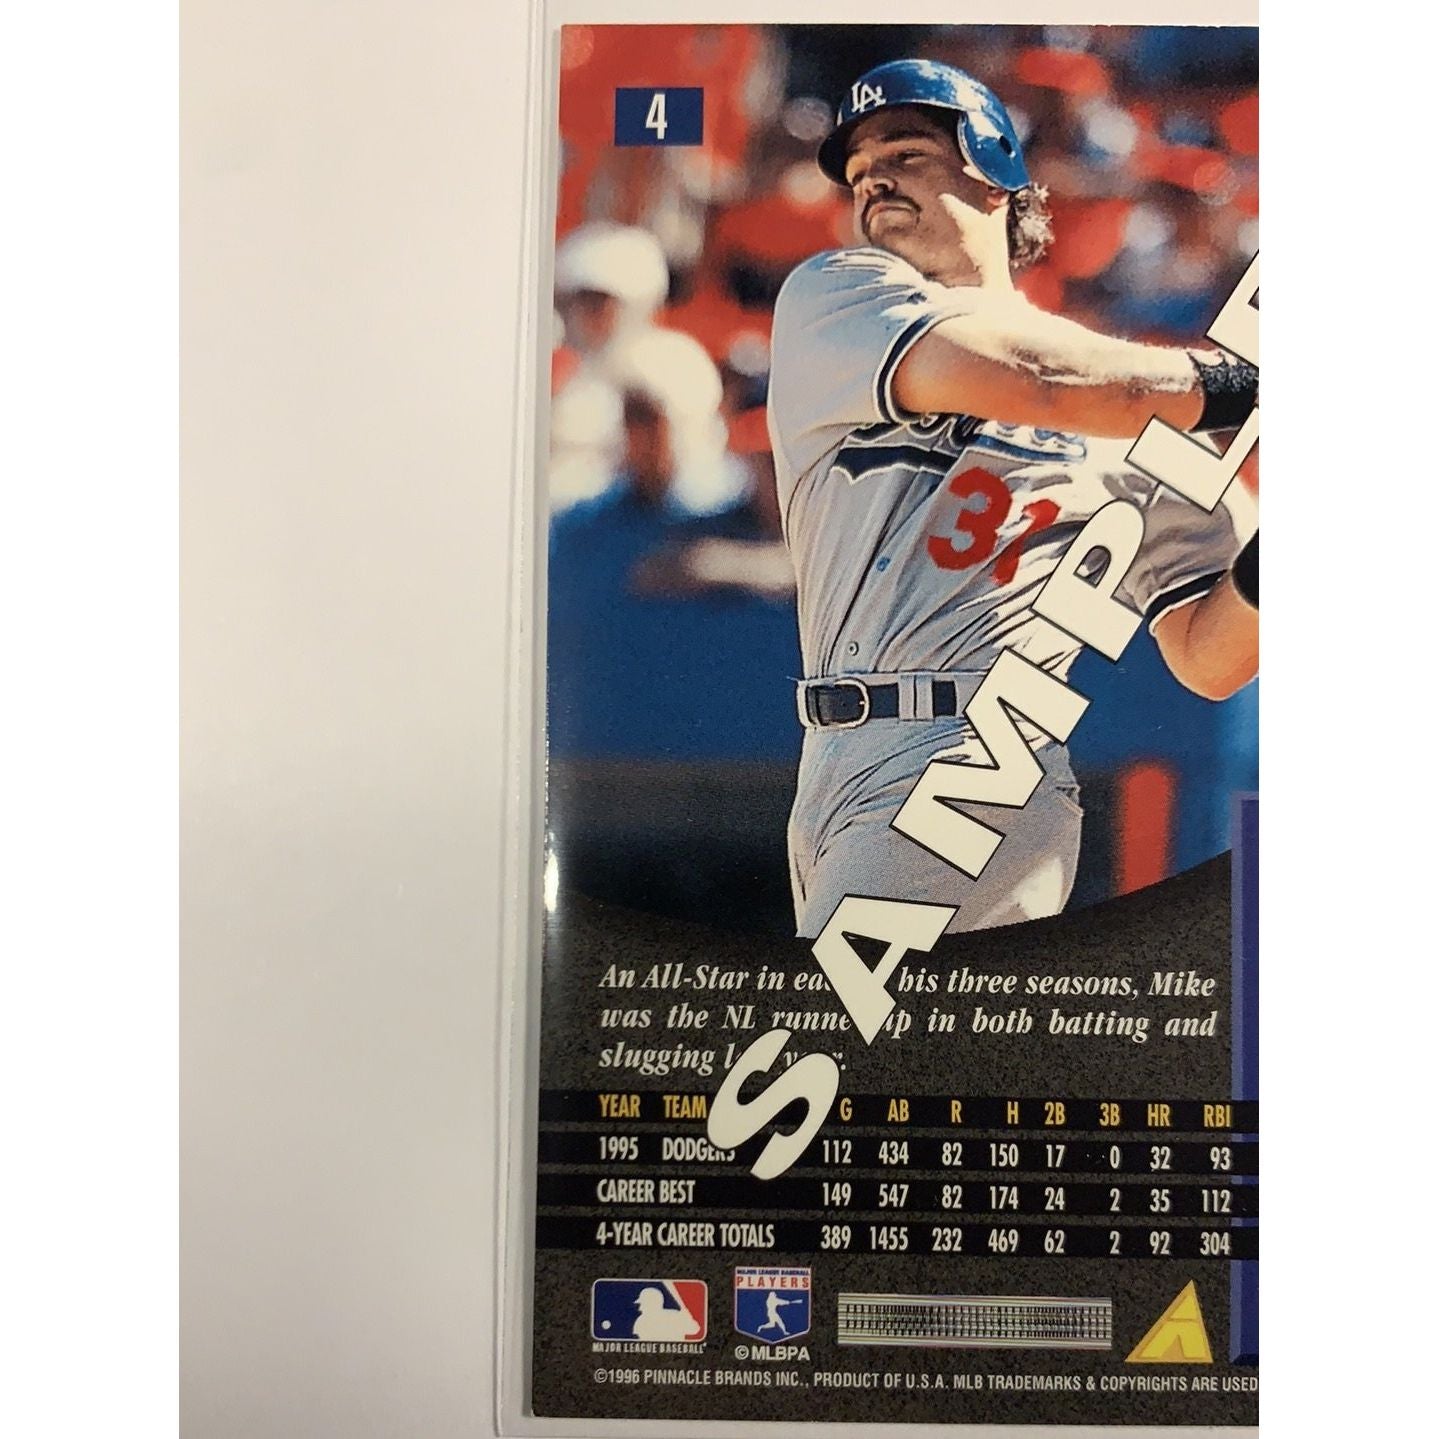  1996 Pinnacle Mike Piazza Promo Sample Card  Local Legends Cards & Collectibles